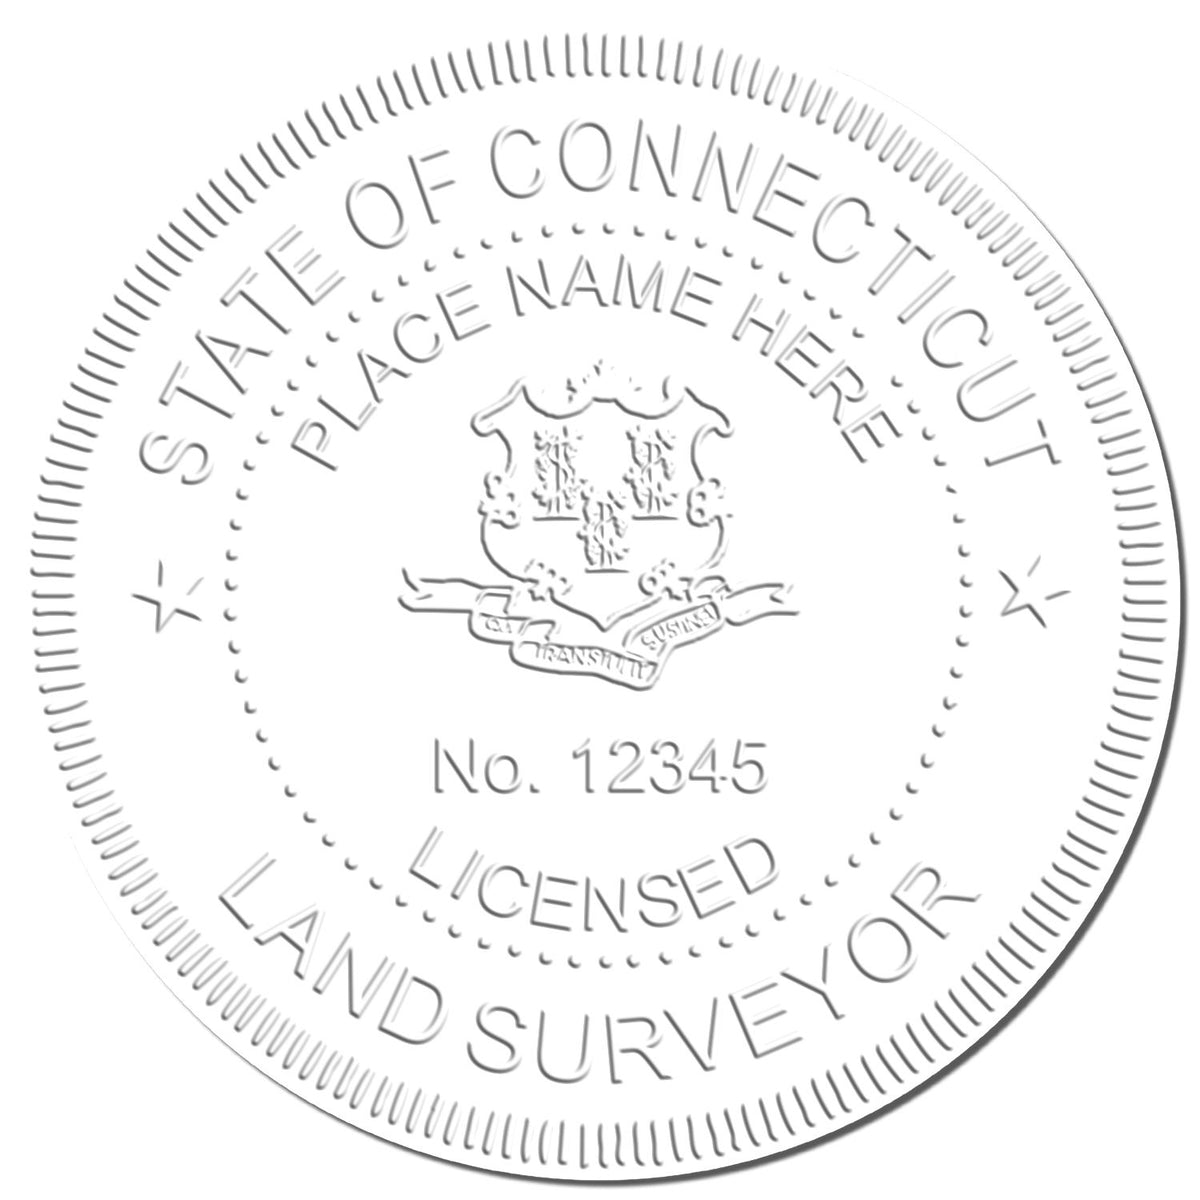 This paper is stamped with a sample imprint of the Handheld Connecticut Land Surveyor Seal, signifying its quality and reliability.